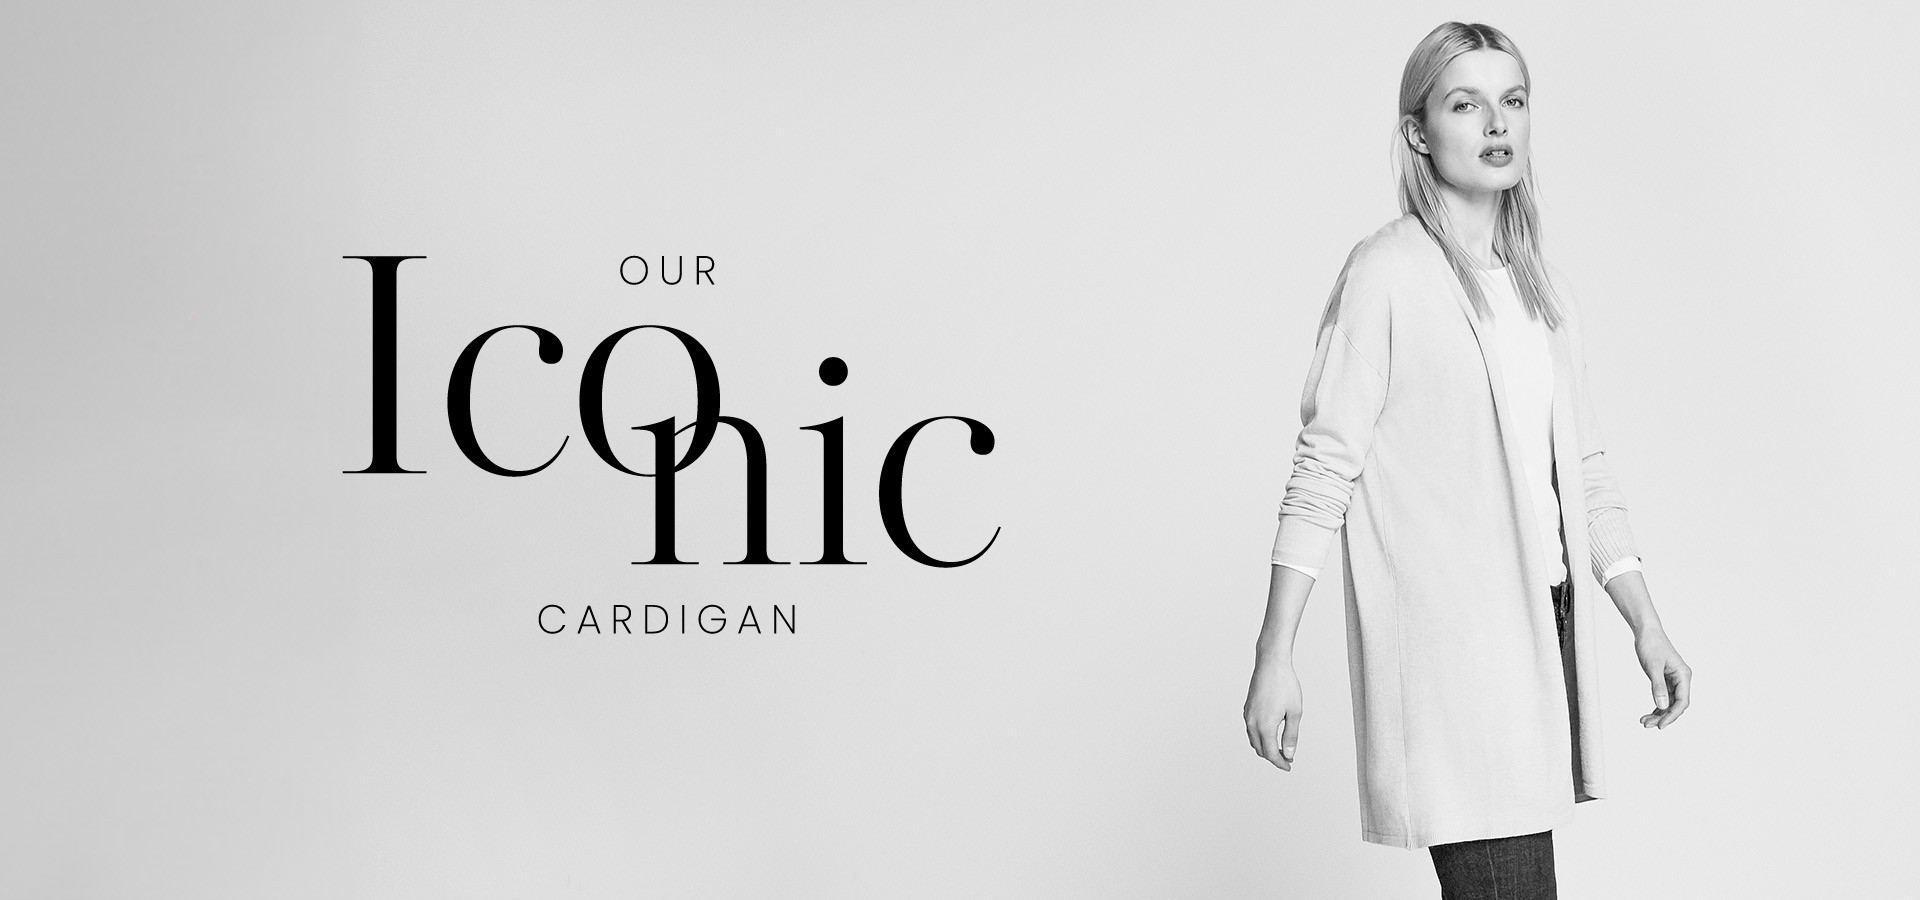 Our iconic cardigan